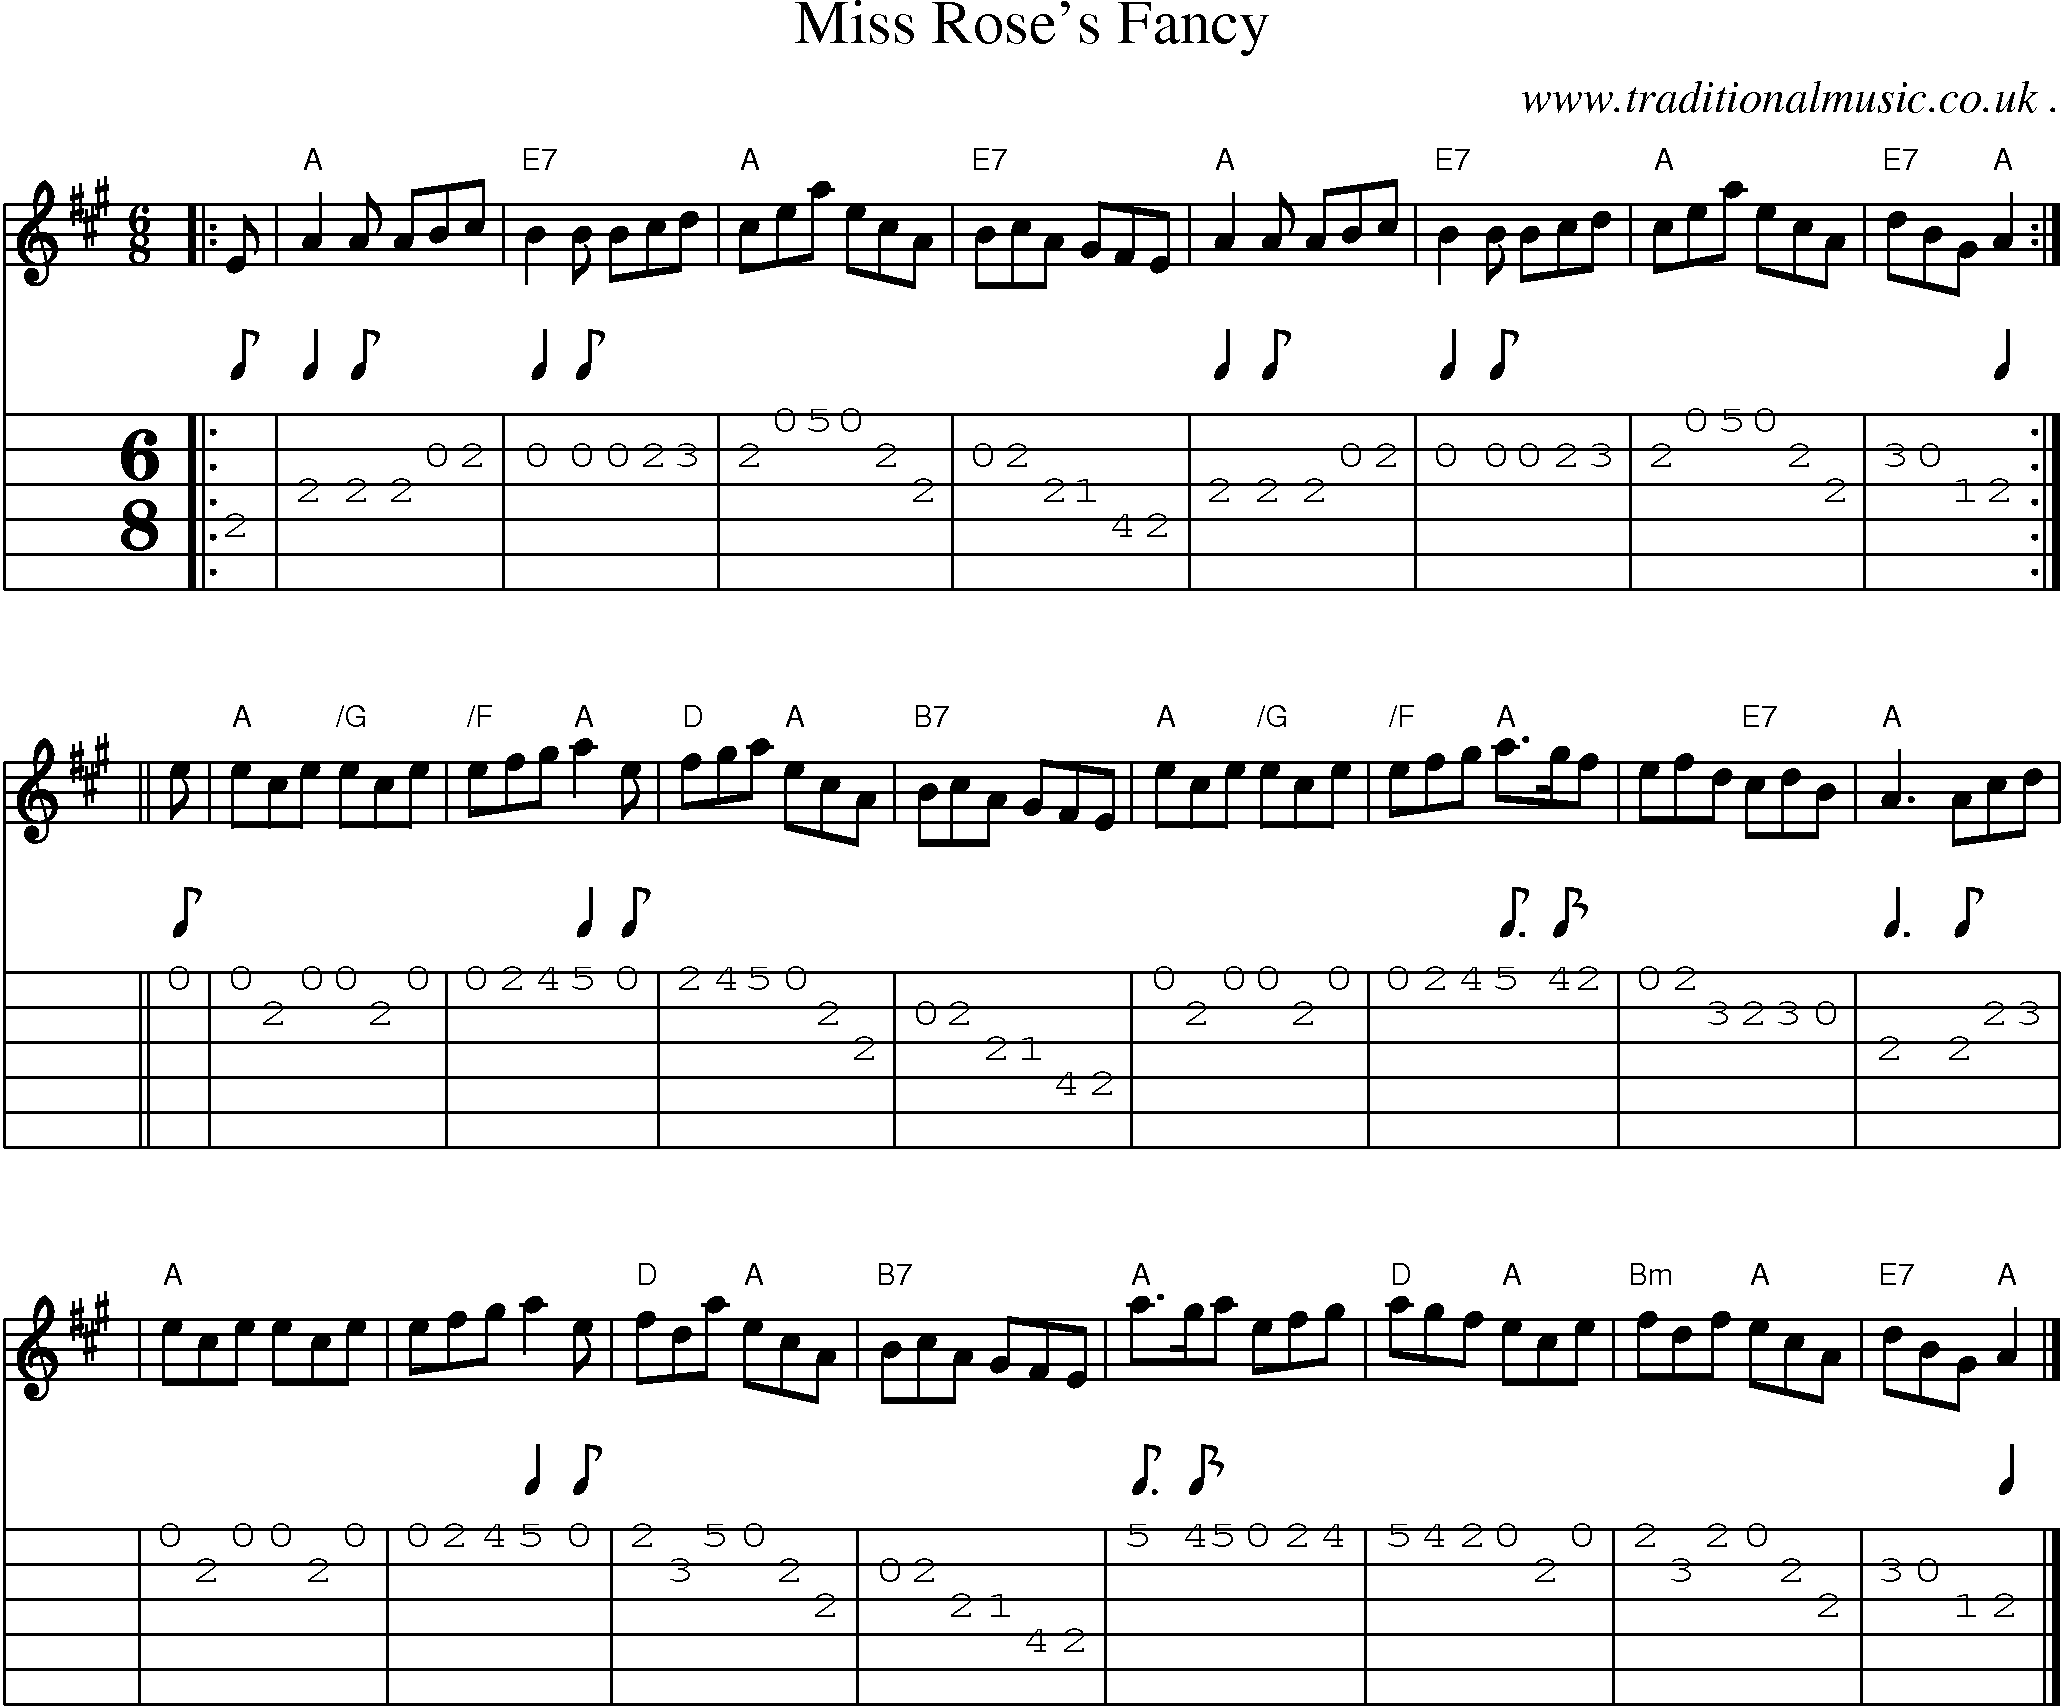 Sheet-music  score, Chords and Guitar Tabs for Miss Roses Fancy